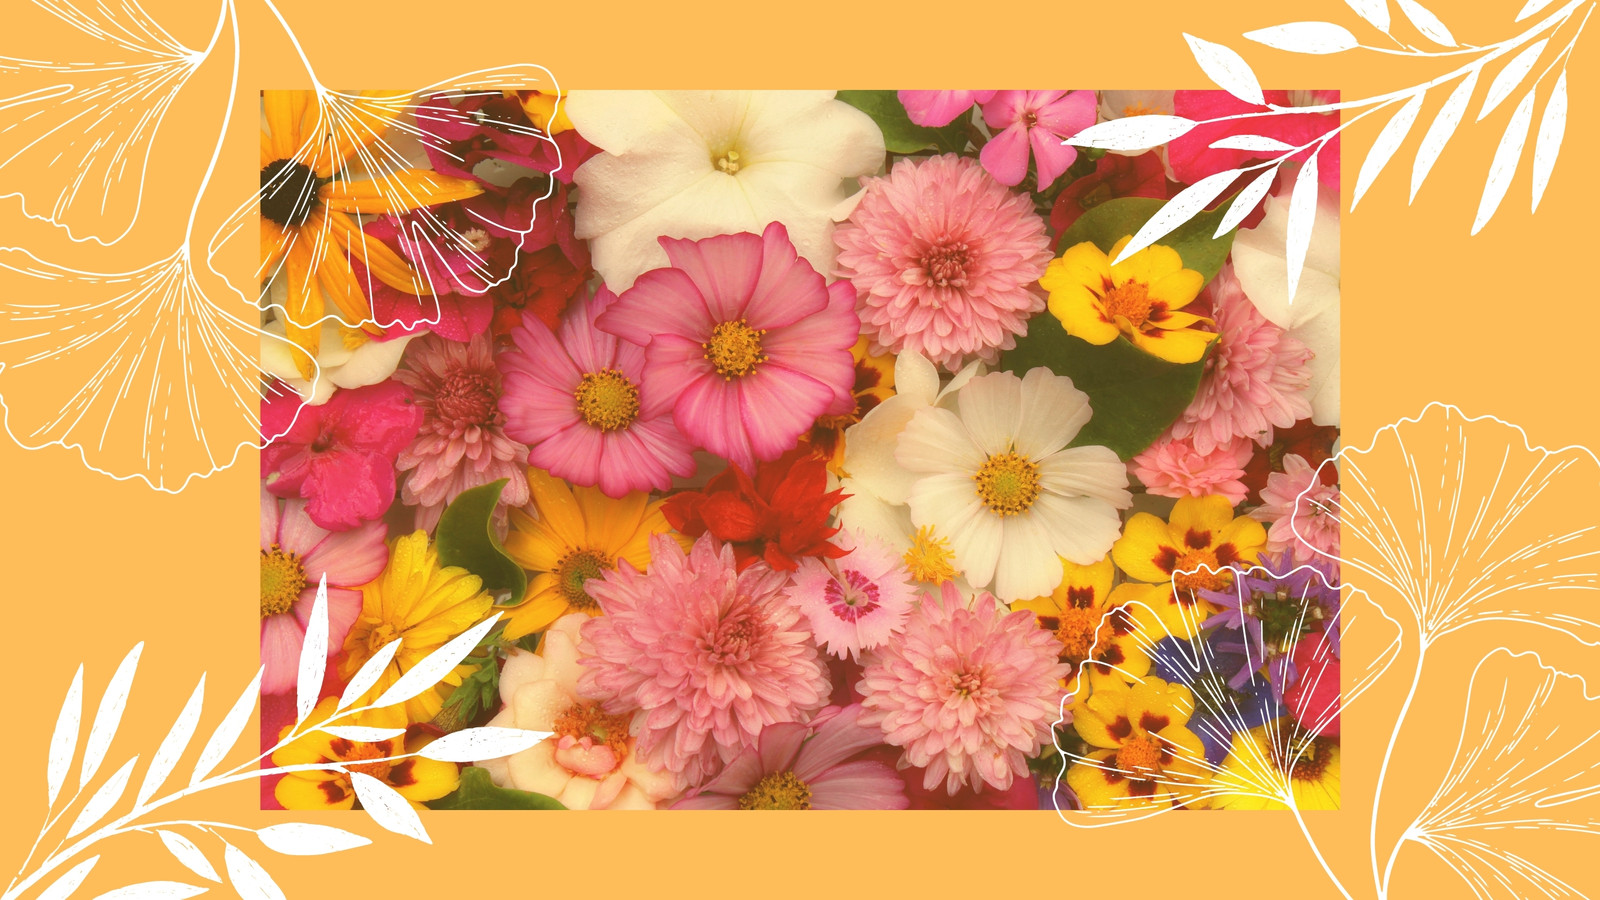 Page 11 - Free and customizable floral desktop wallpaper templates | Canva